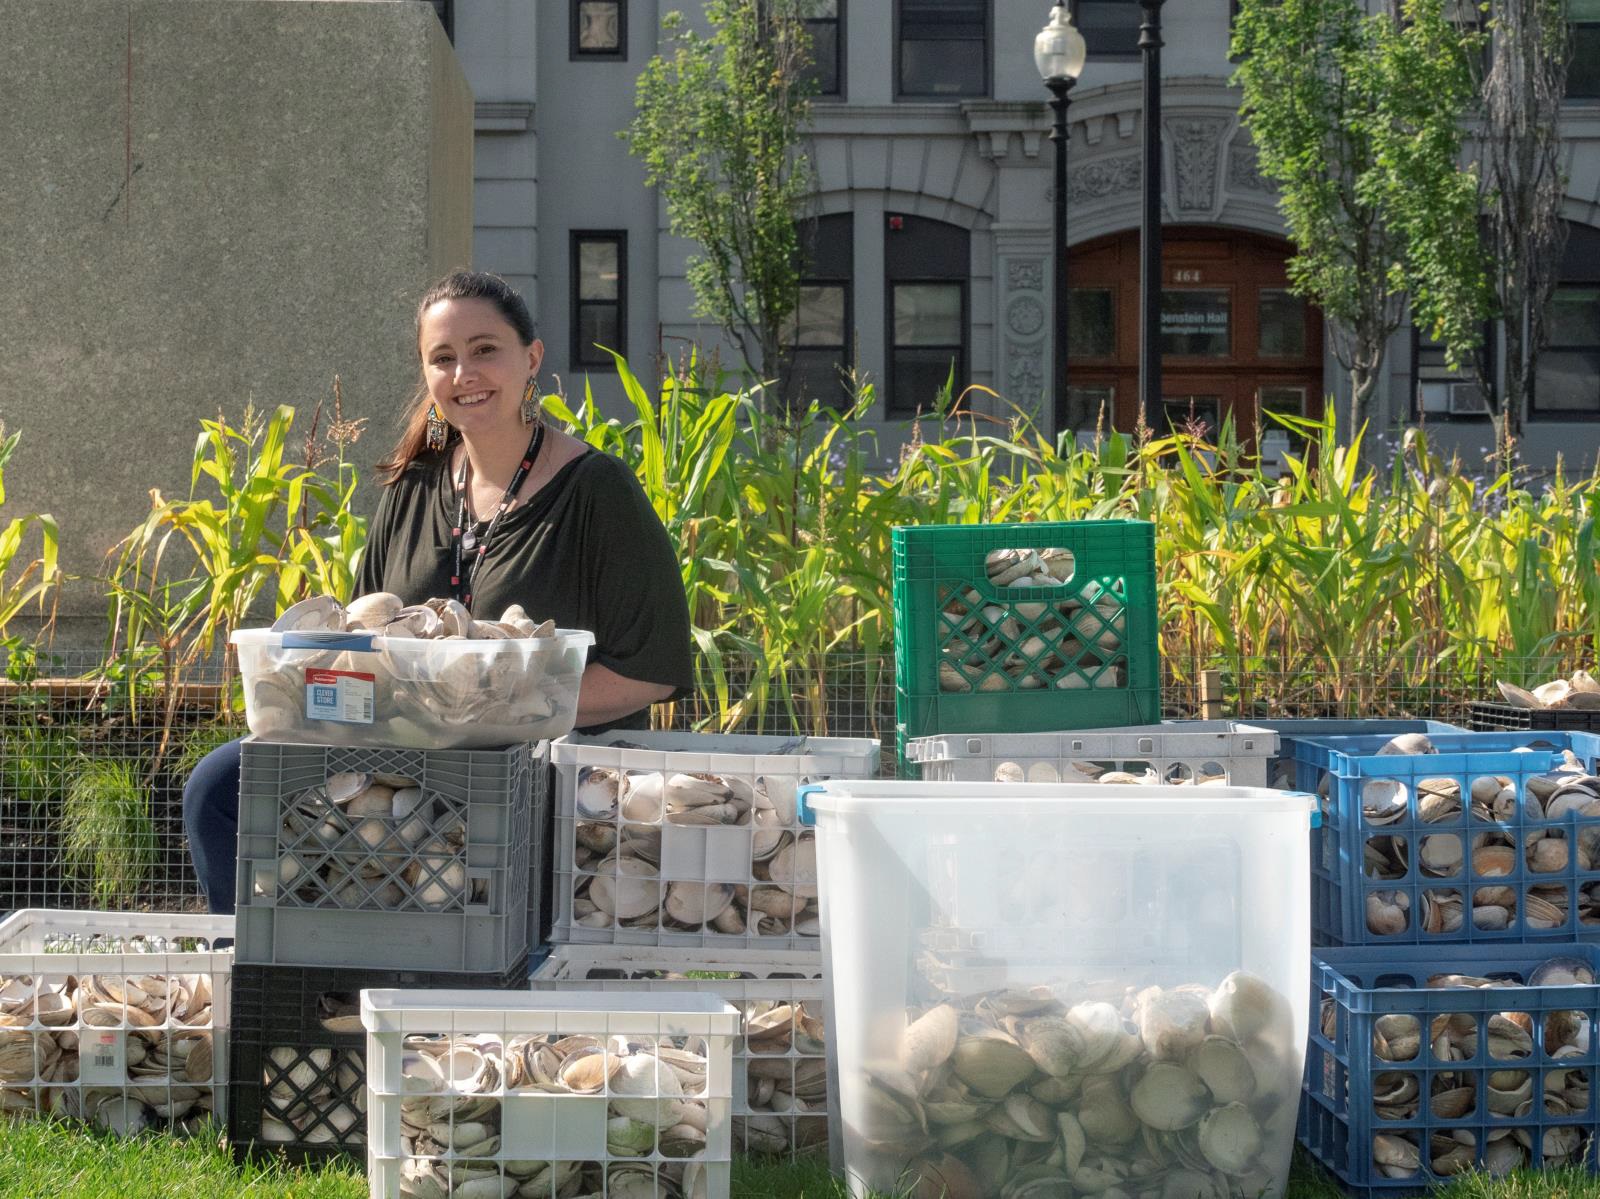 Color photograph of a smiling woman seated behind bins of seashells in an urban garden setting